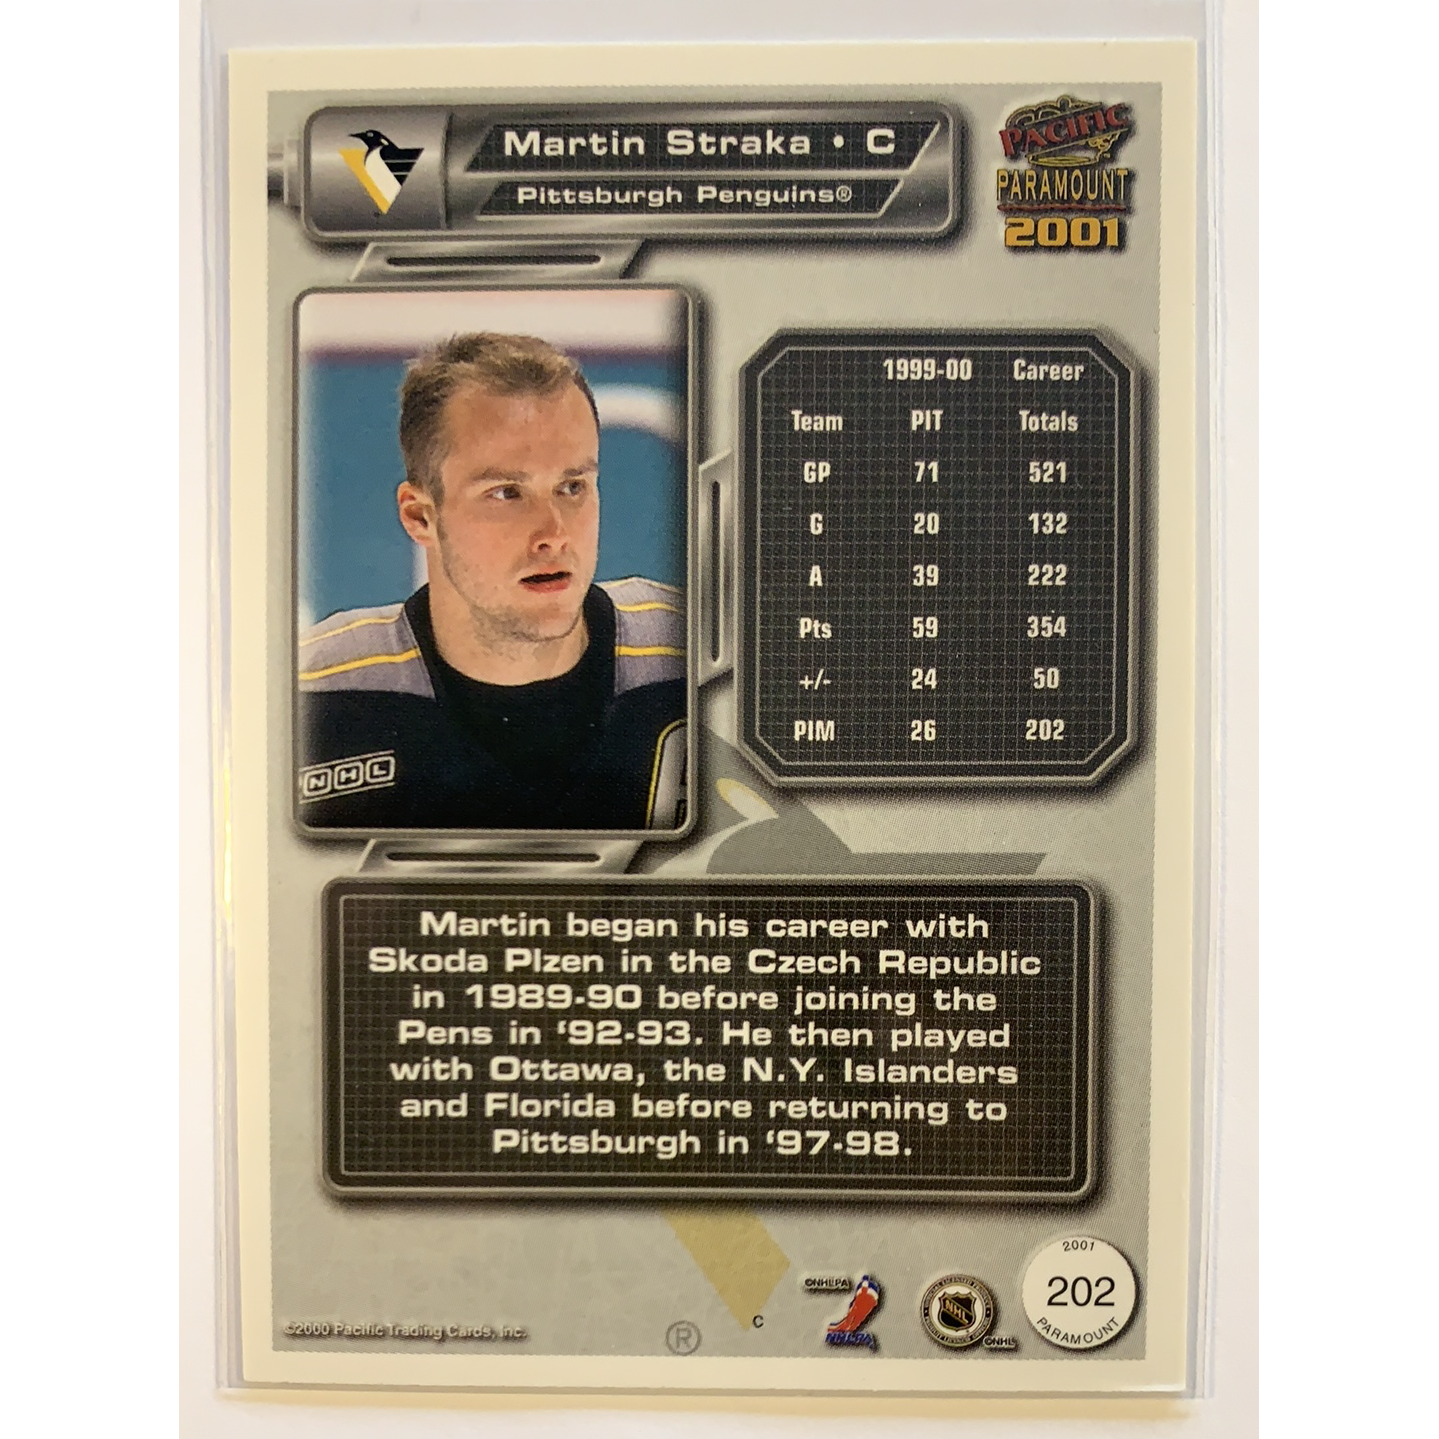  2000-01 Pacific Paramount Martin Straka Gold Holo /74  Local Legends Cards & Collectibles